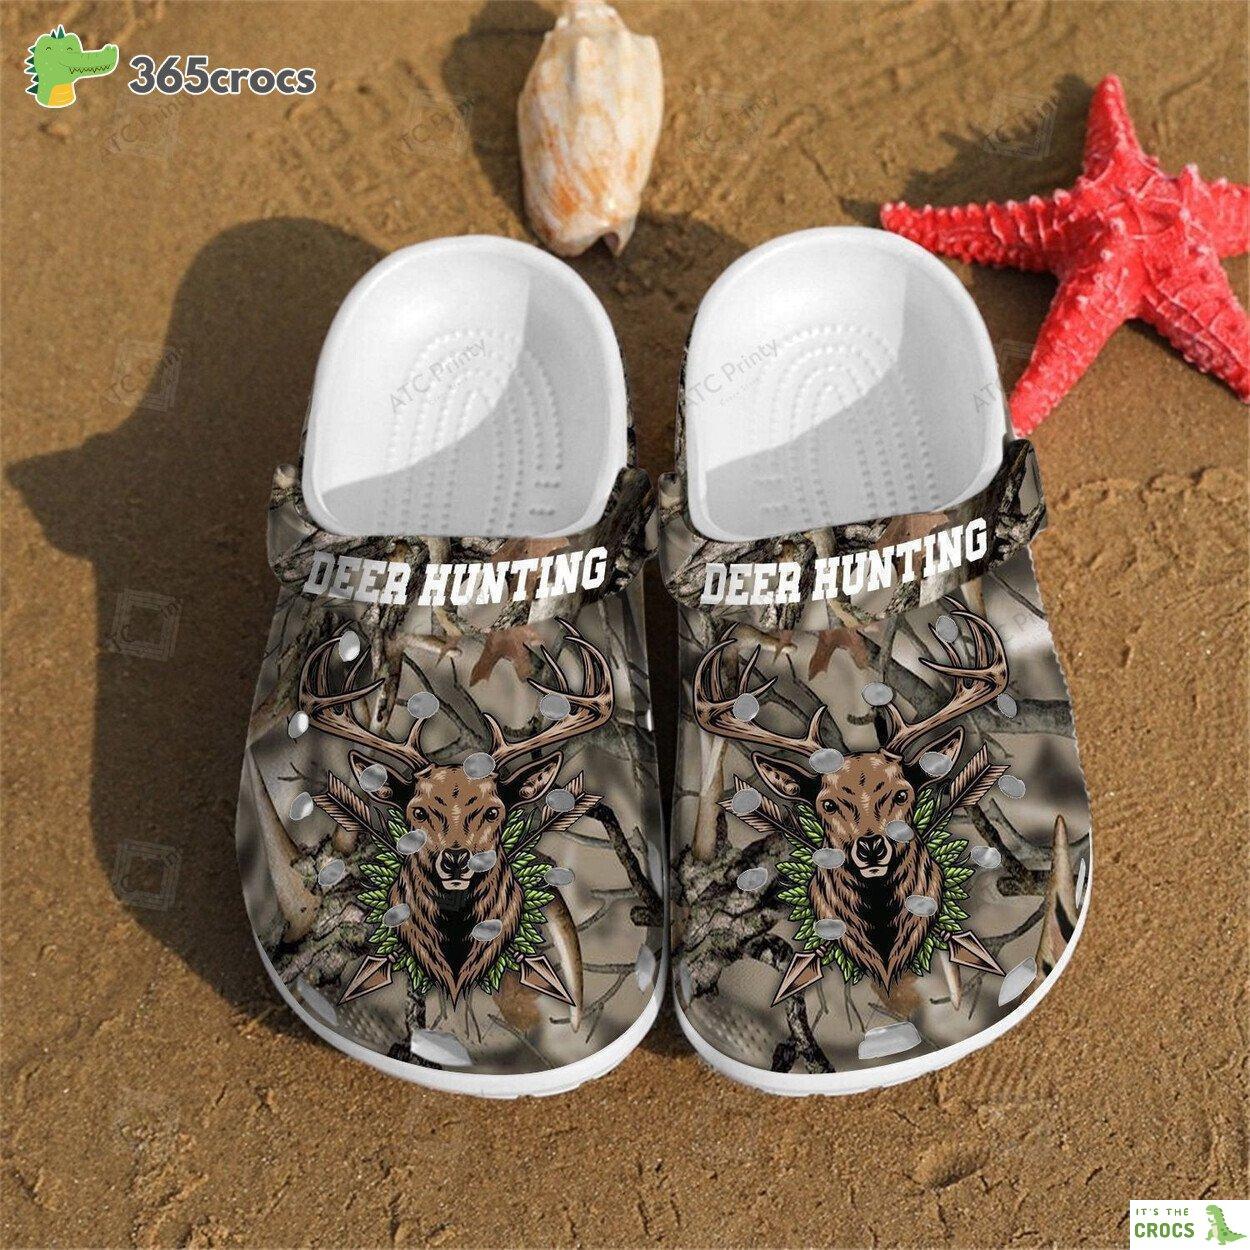 Deer Hunting Croc Shoes For Men Deer Shoes Crocbland Clog Gifts For Father Day